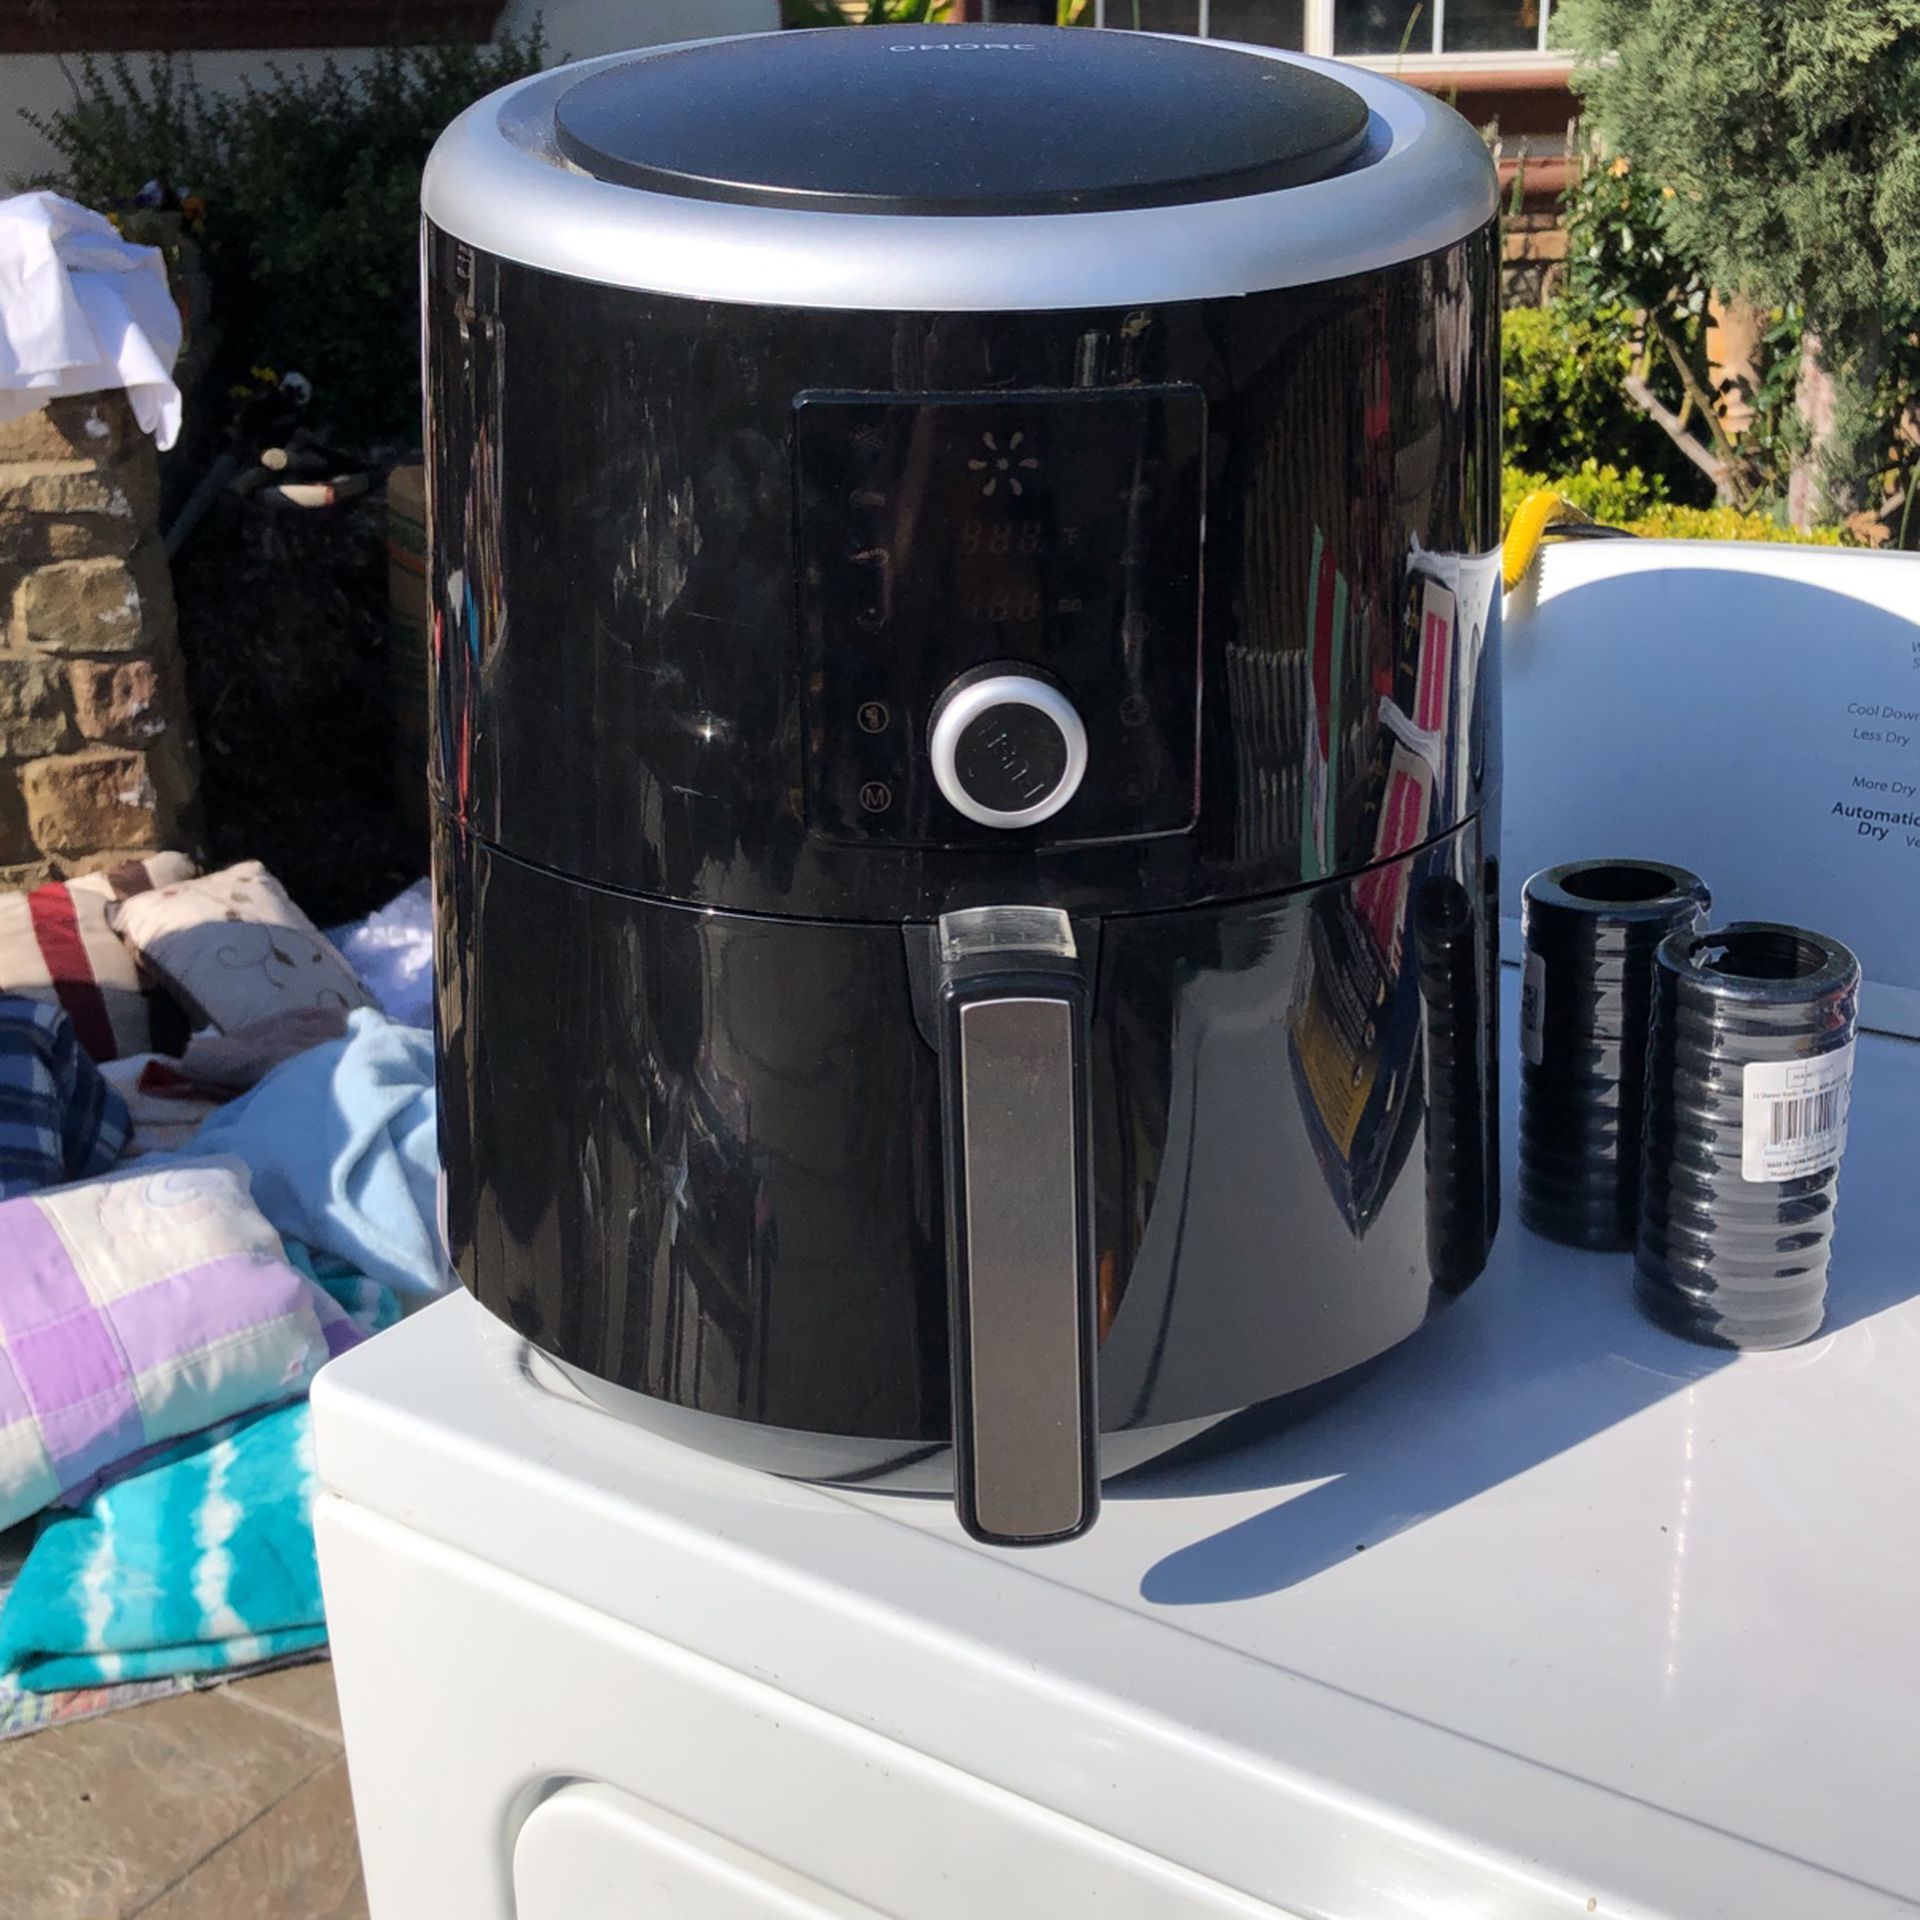 Breville Smart 4 Quart Deep Fryer - Like New for Sale in Campbell, CA -  OfferUp